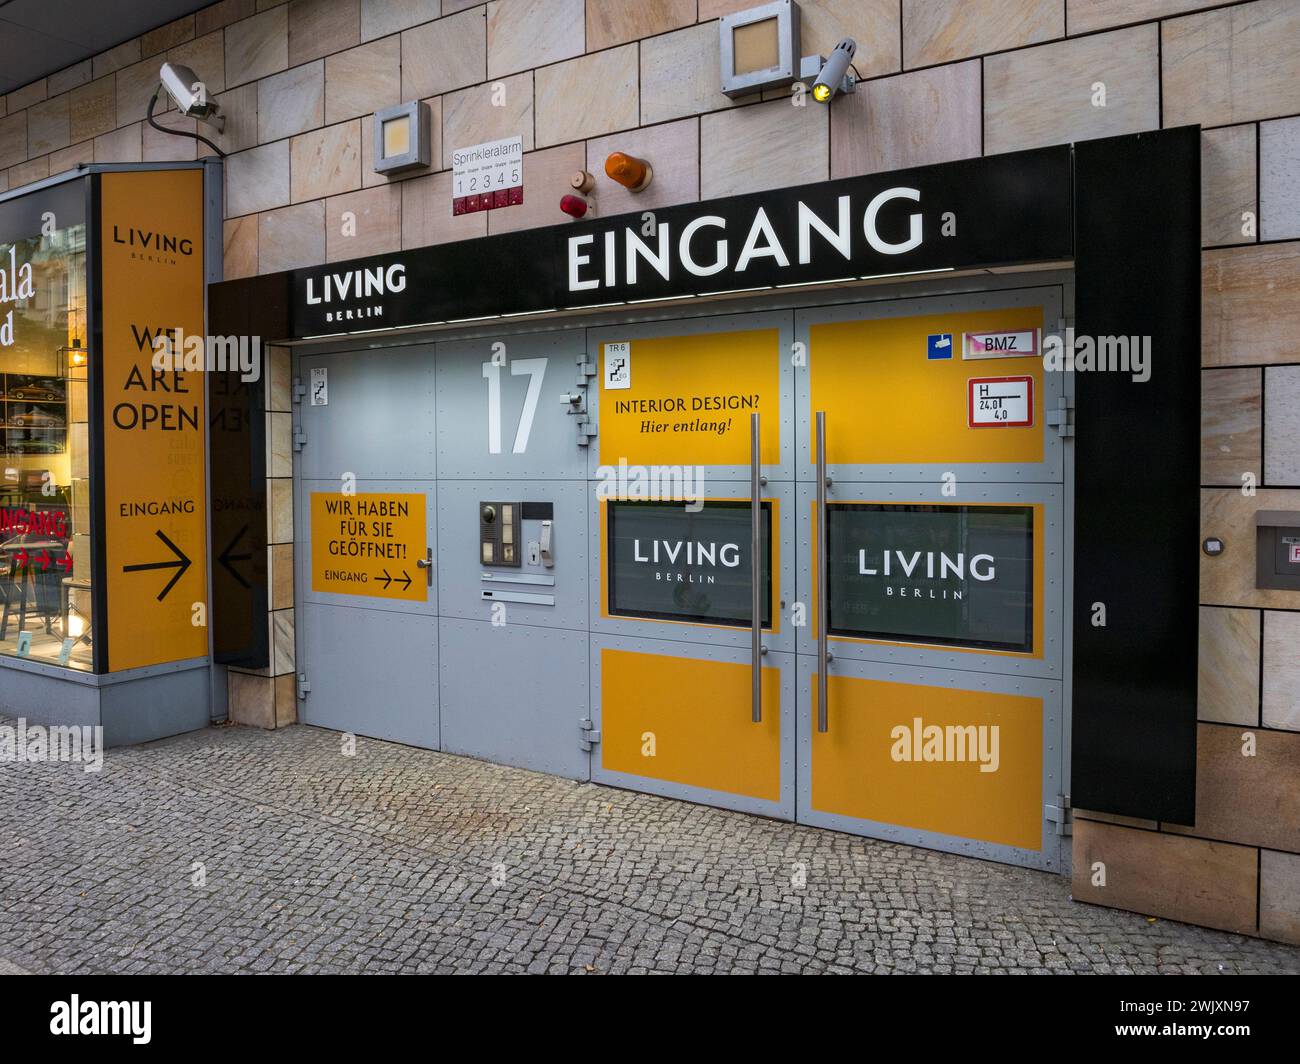 'Living Berlin' eingang (entrance) to an underground car park in Charlottenburg, Berlin, Germany. Stock Photo